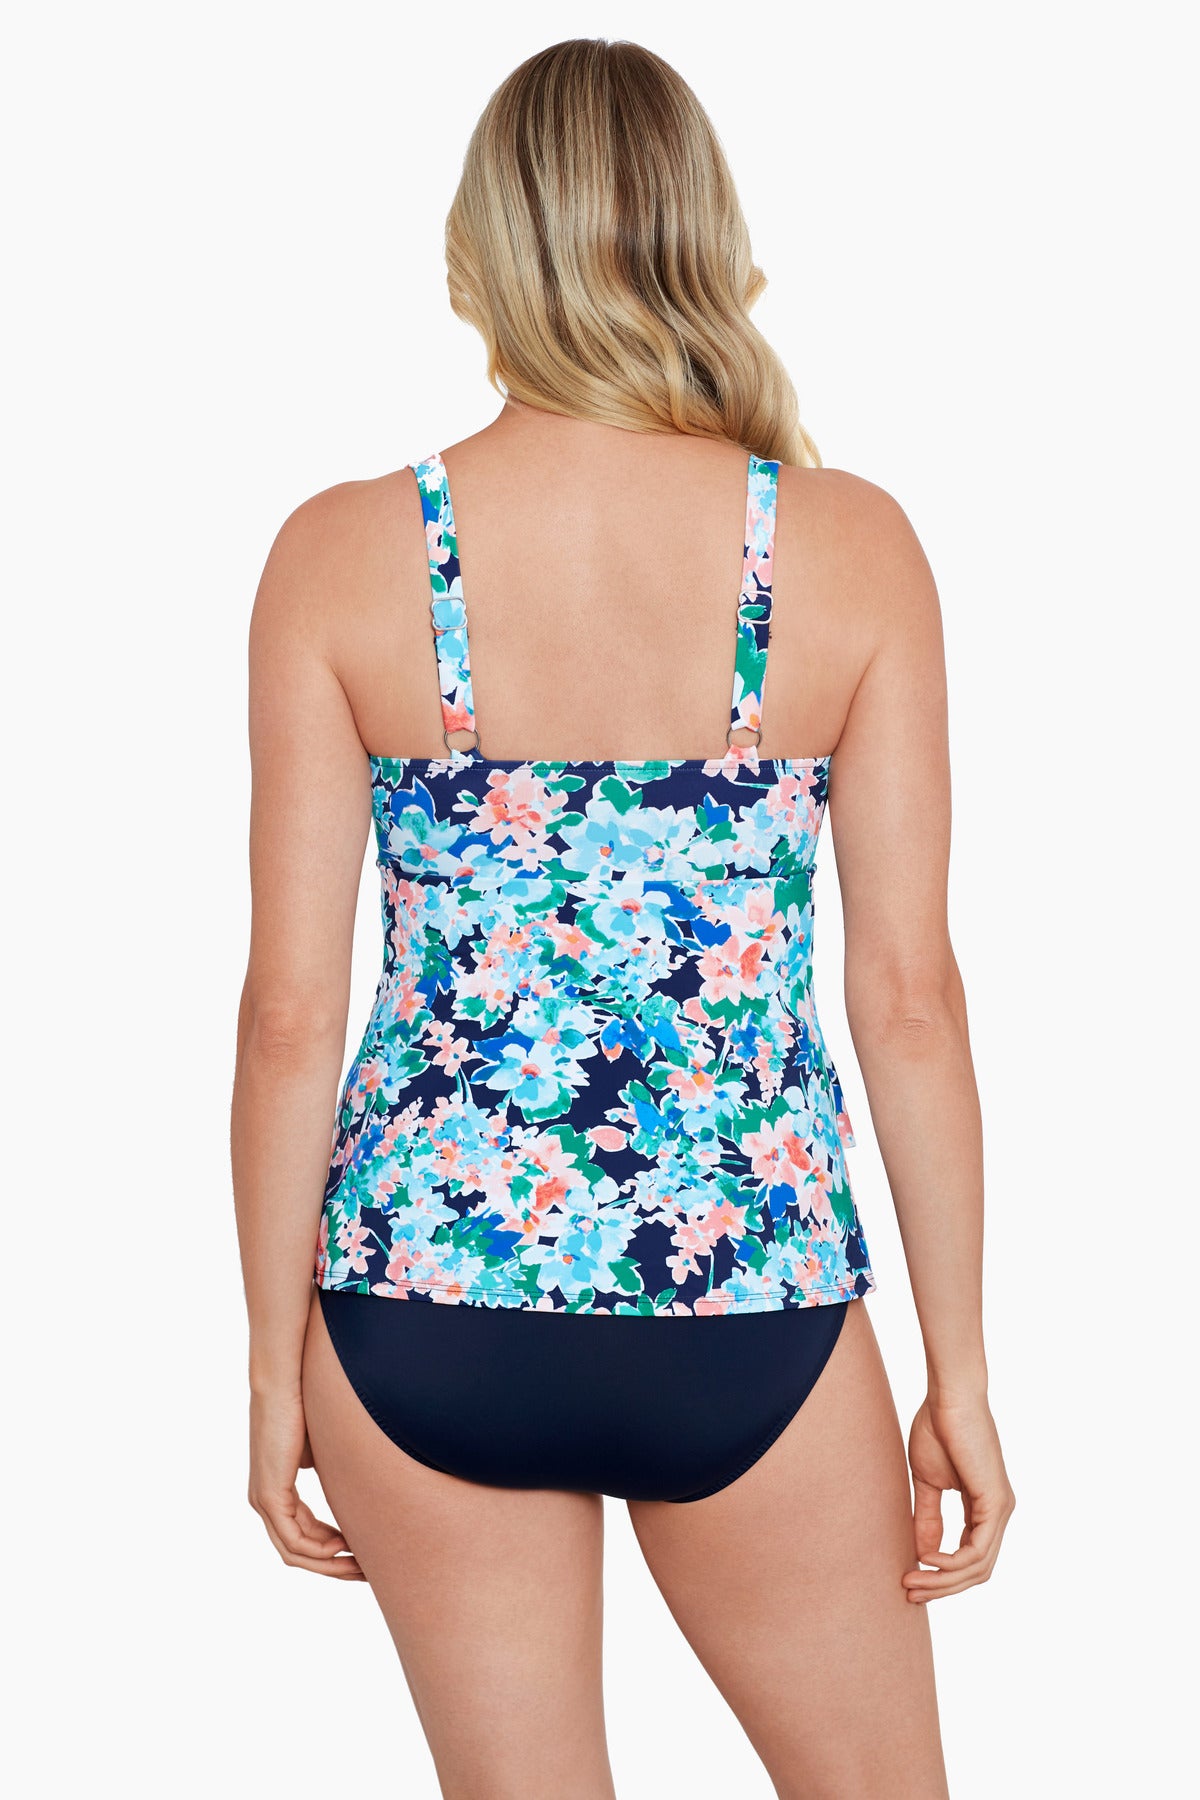 Shapesolver Triple Tier Fauxkini One Piece Swimsuit Ditsy Days